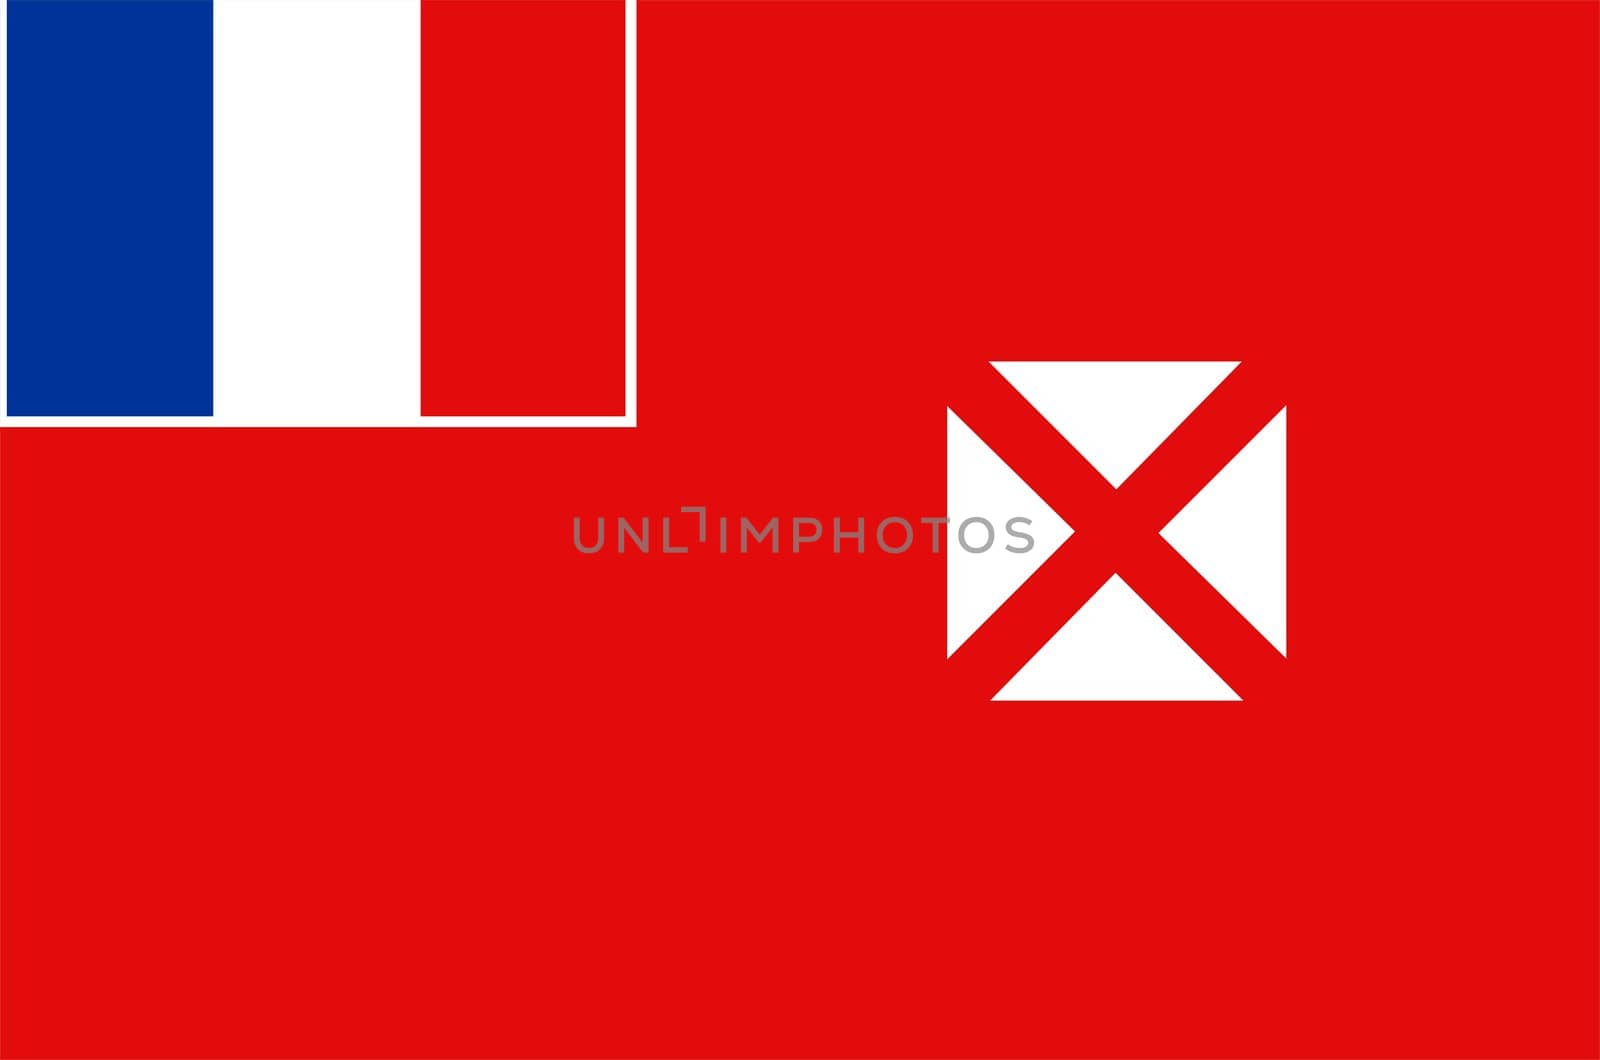 2D illustration of the flag of Wallis and Futuna